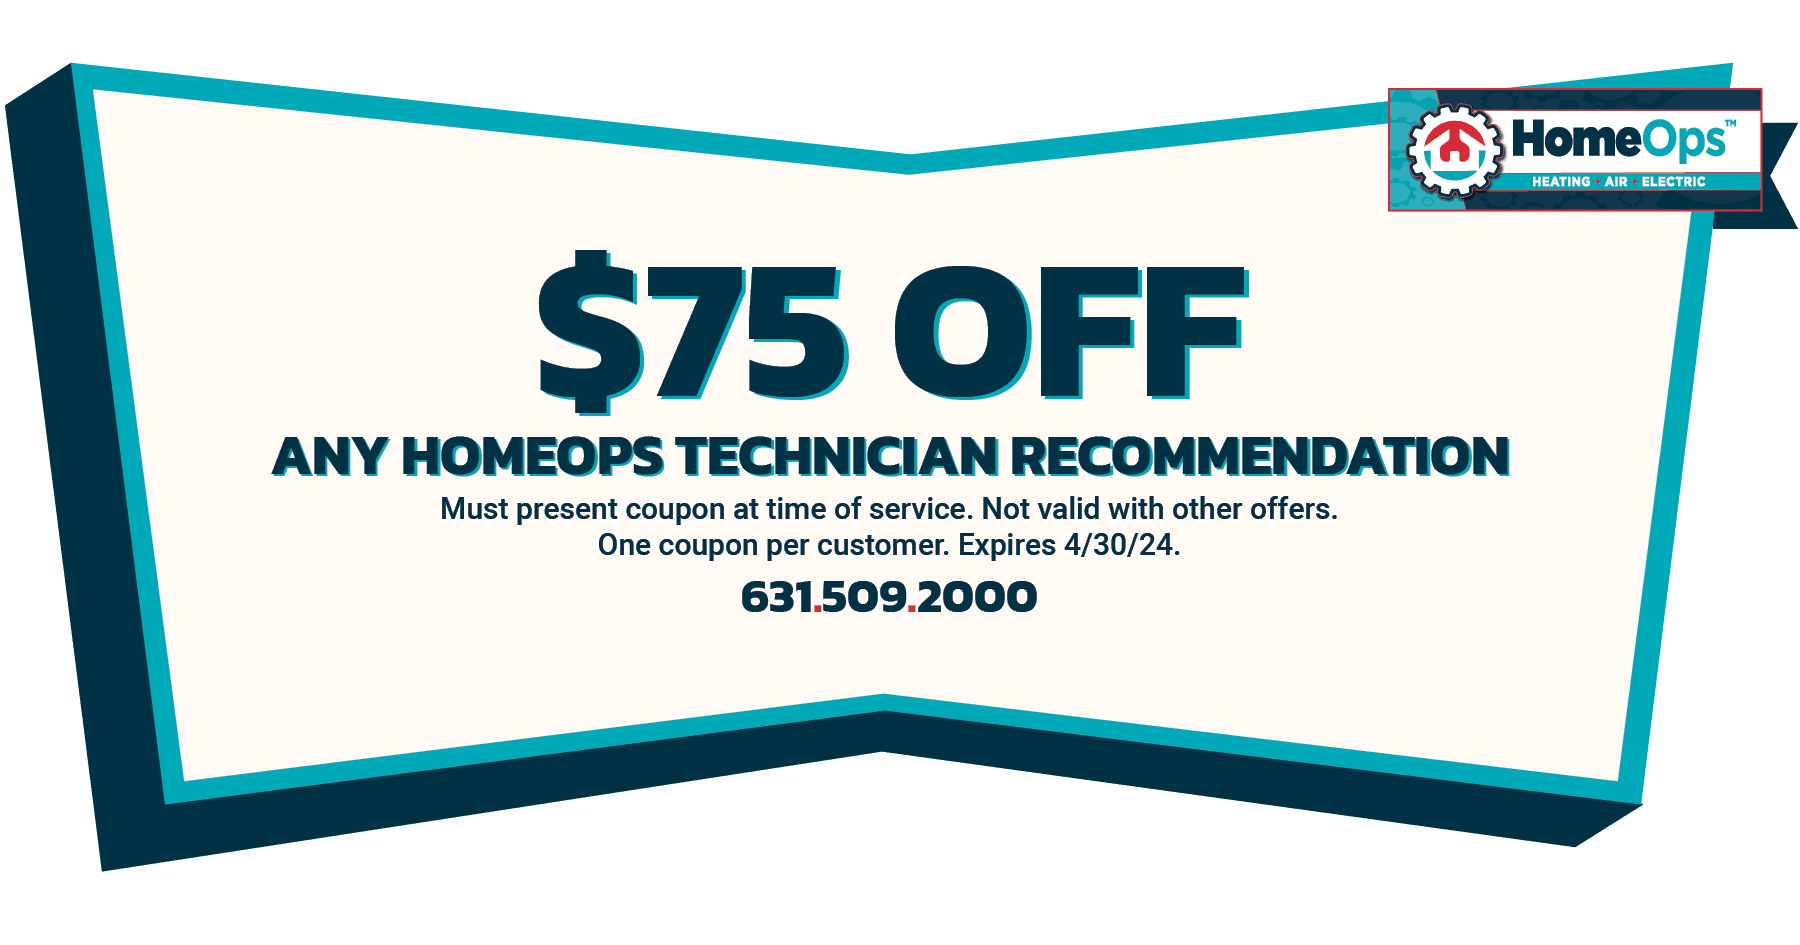  Off Any HomeOps Technician Recommendation expires April 30th, 2024.